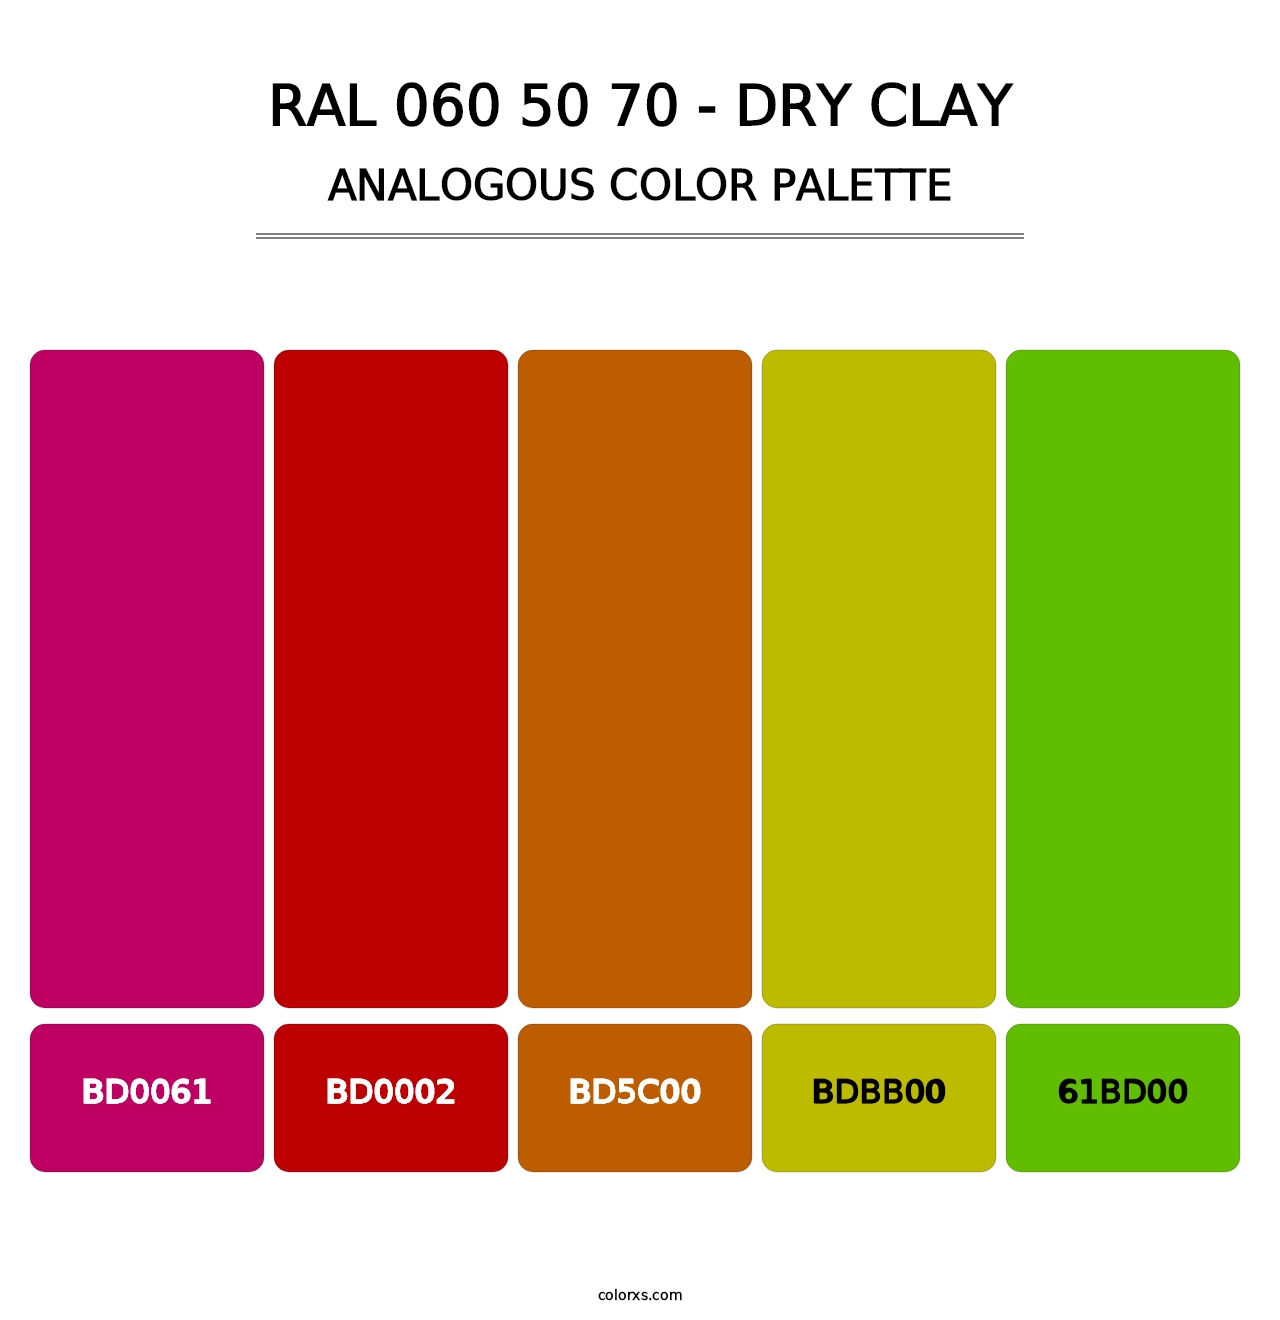 RAL 060 50 70 - Dry Clay - Analogous Color Palette